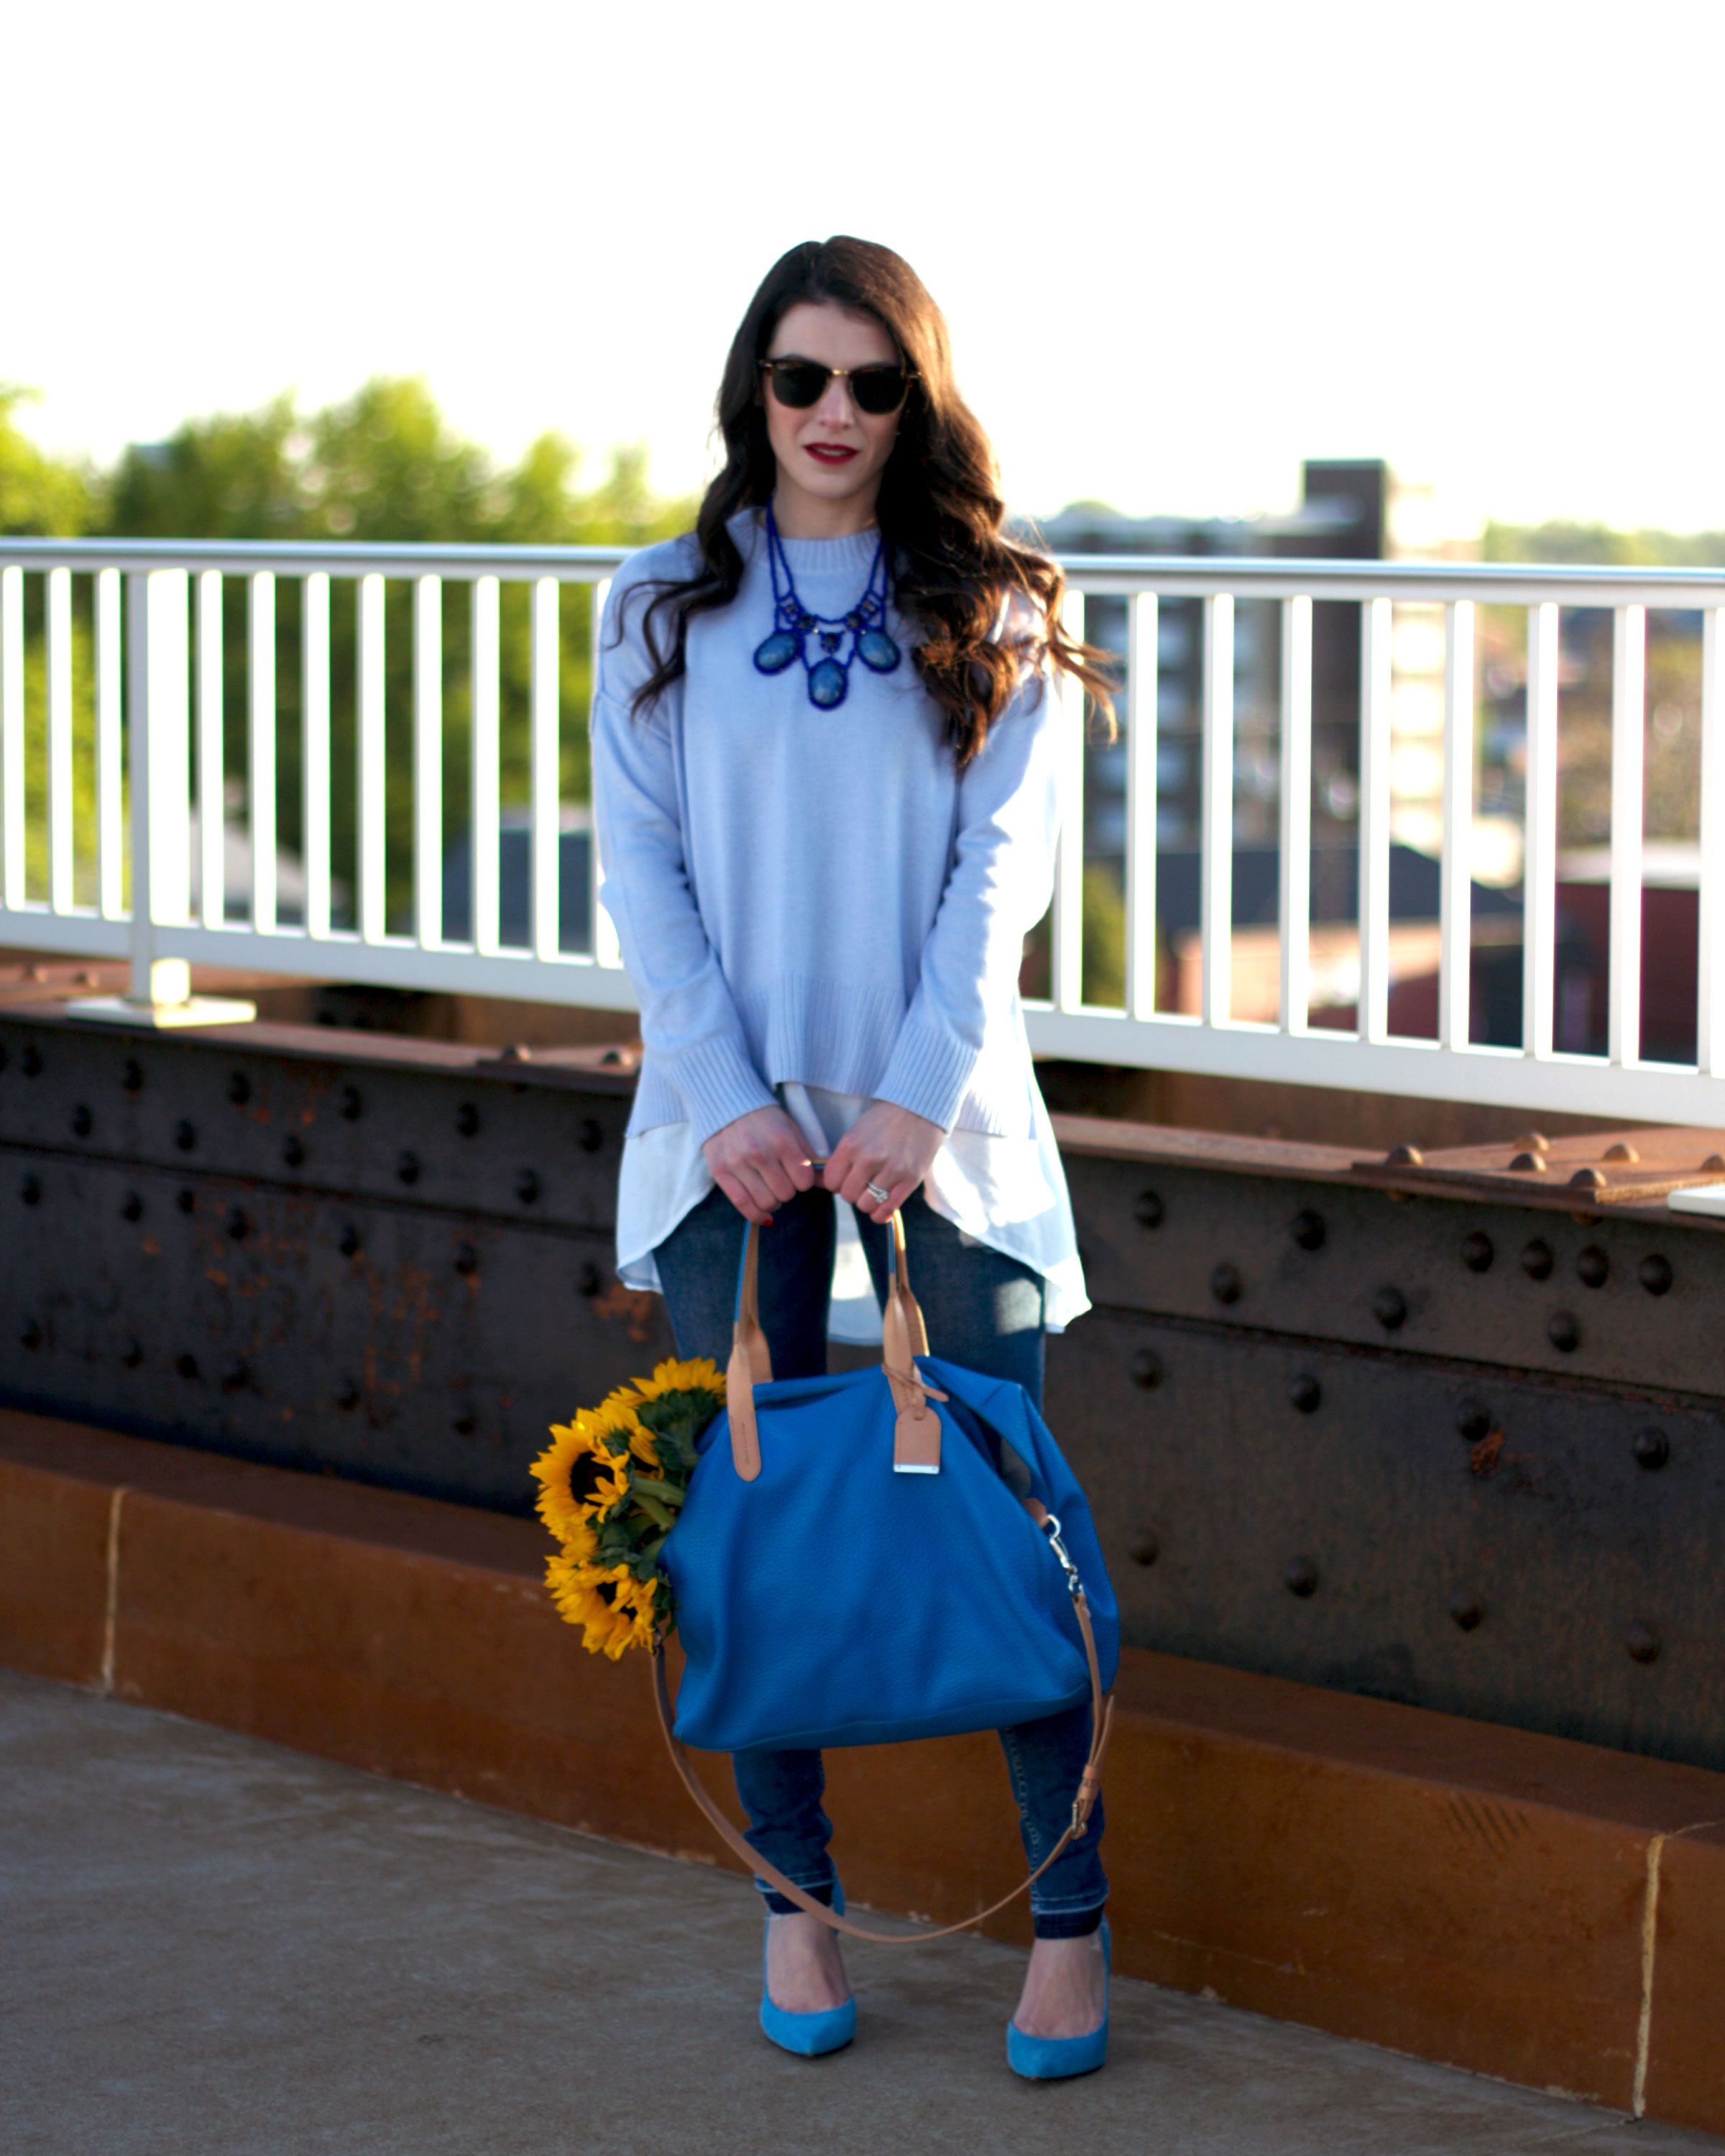 Fashion Blogger, Spring Layering, Spring Sweater, Monochromatic Outfit, Blue Star Balloons, Birthday Balloons, J.Crew Field Jacket, Sunflowers, Cole Haan Handbag, Jessica Simpson Claudette Pumps